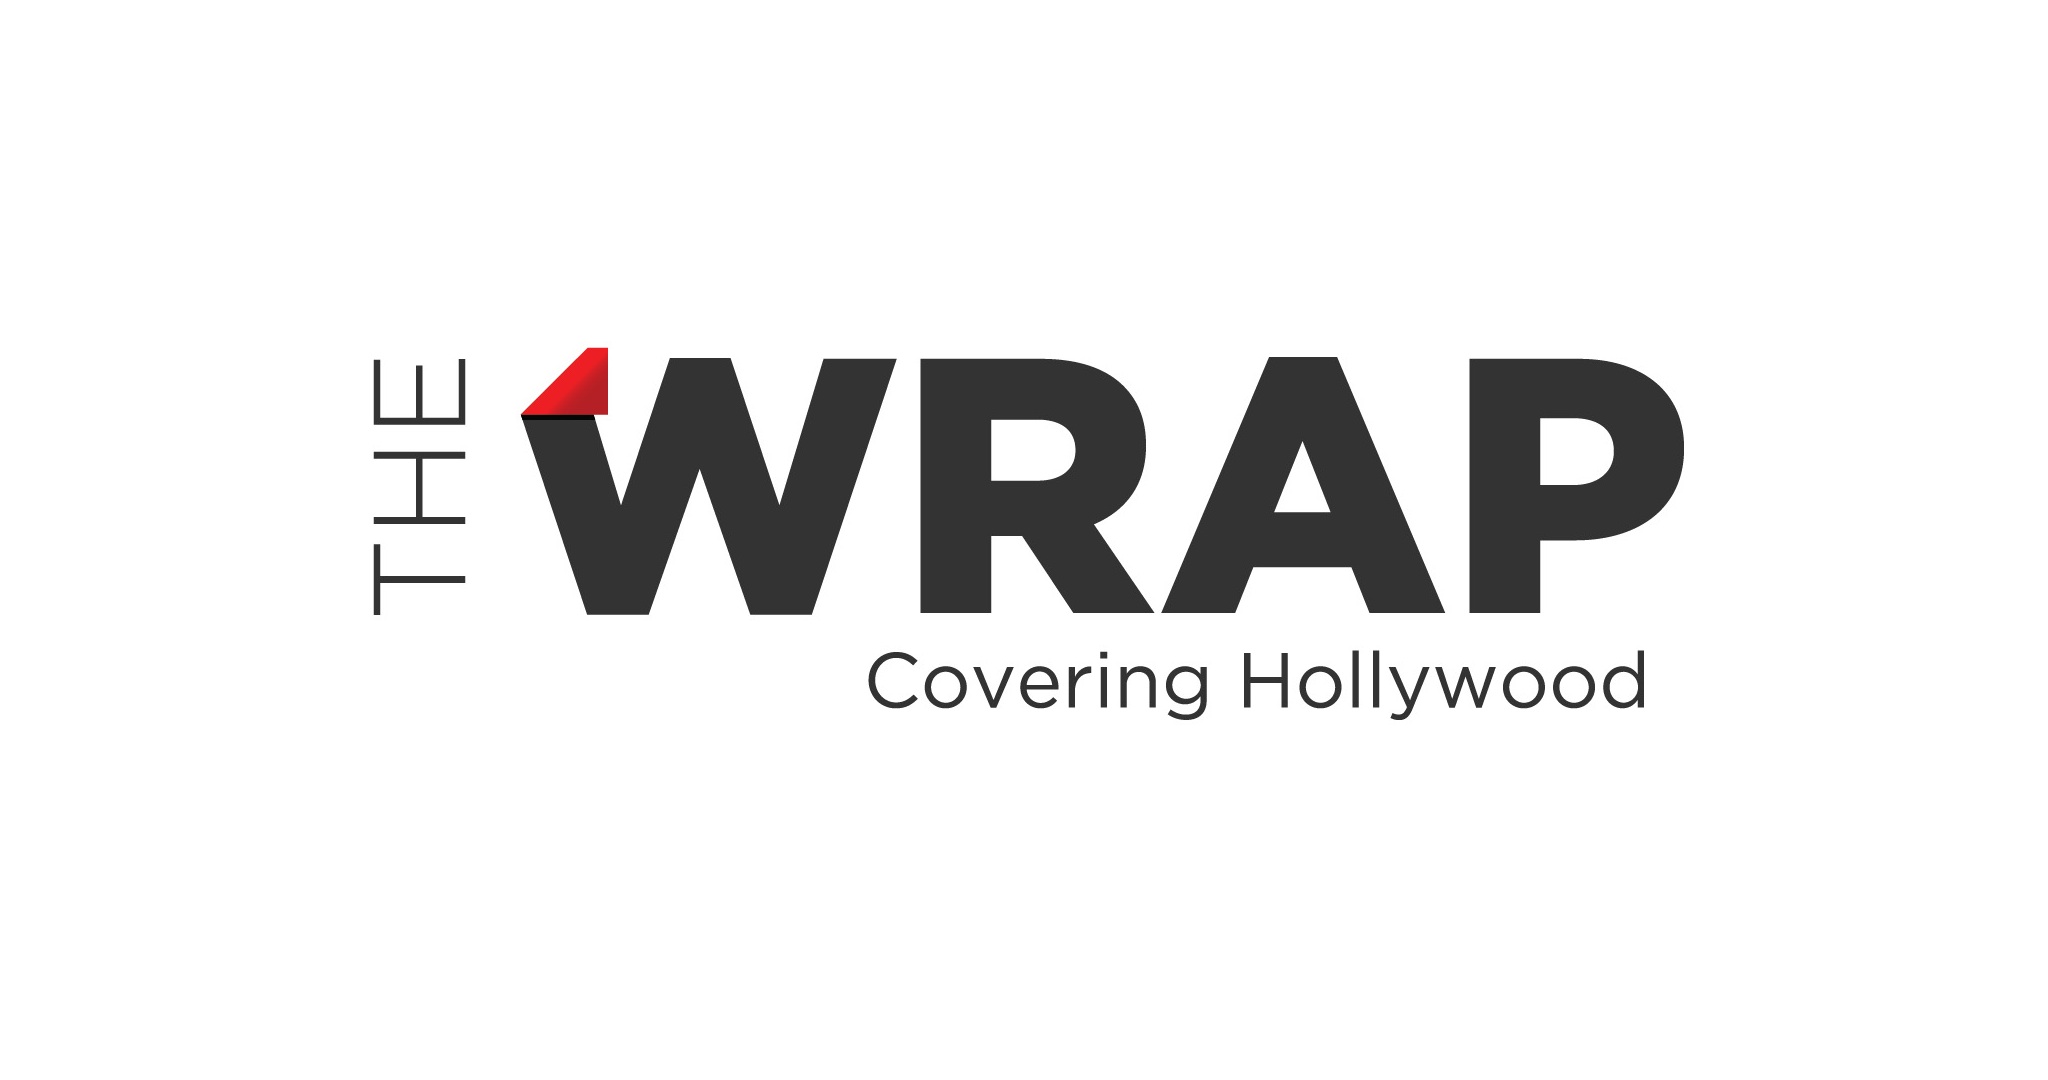 The Wrap (Reviewed By Thom Geier) 